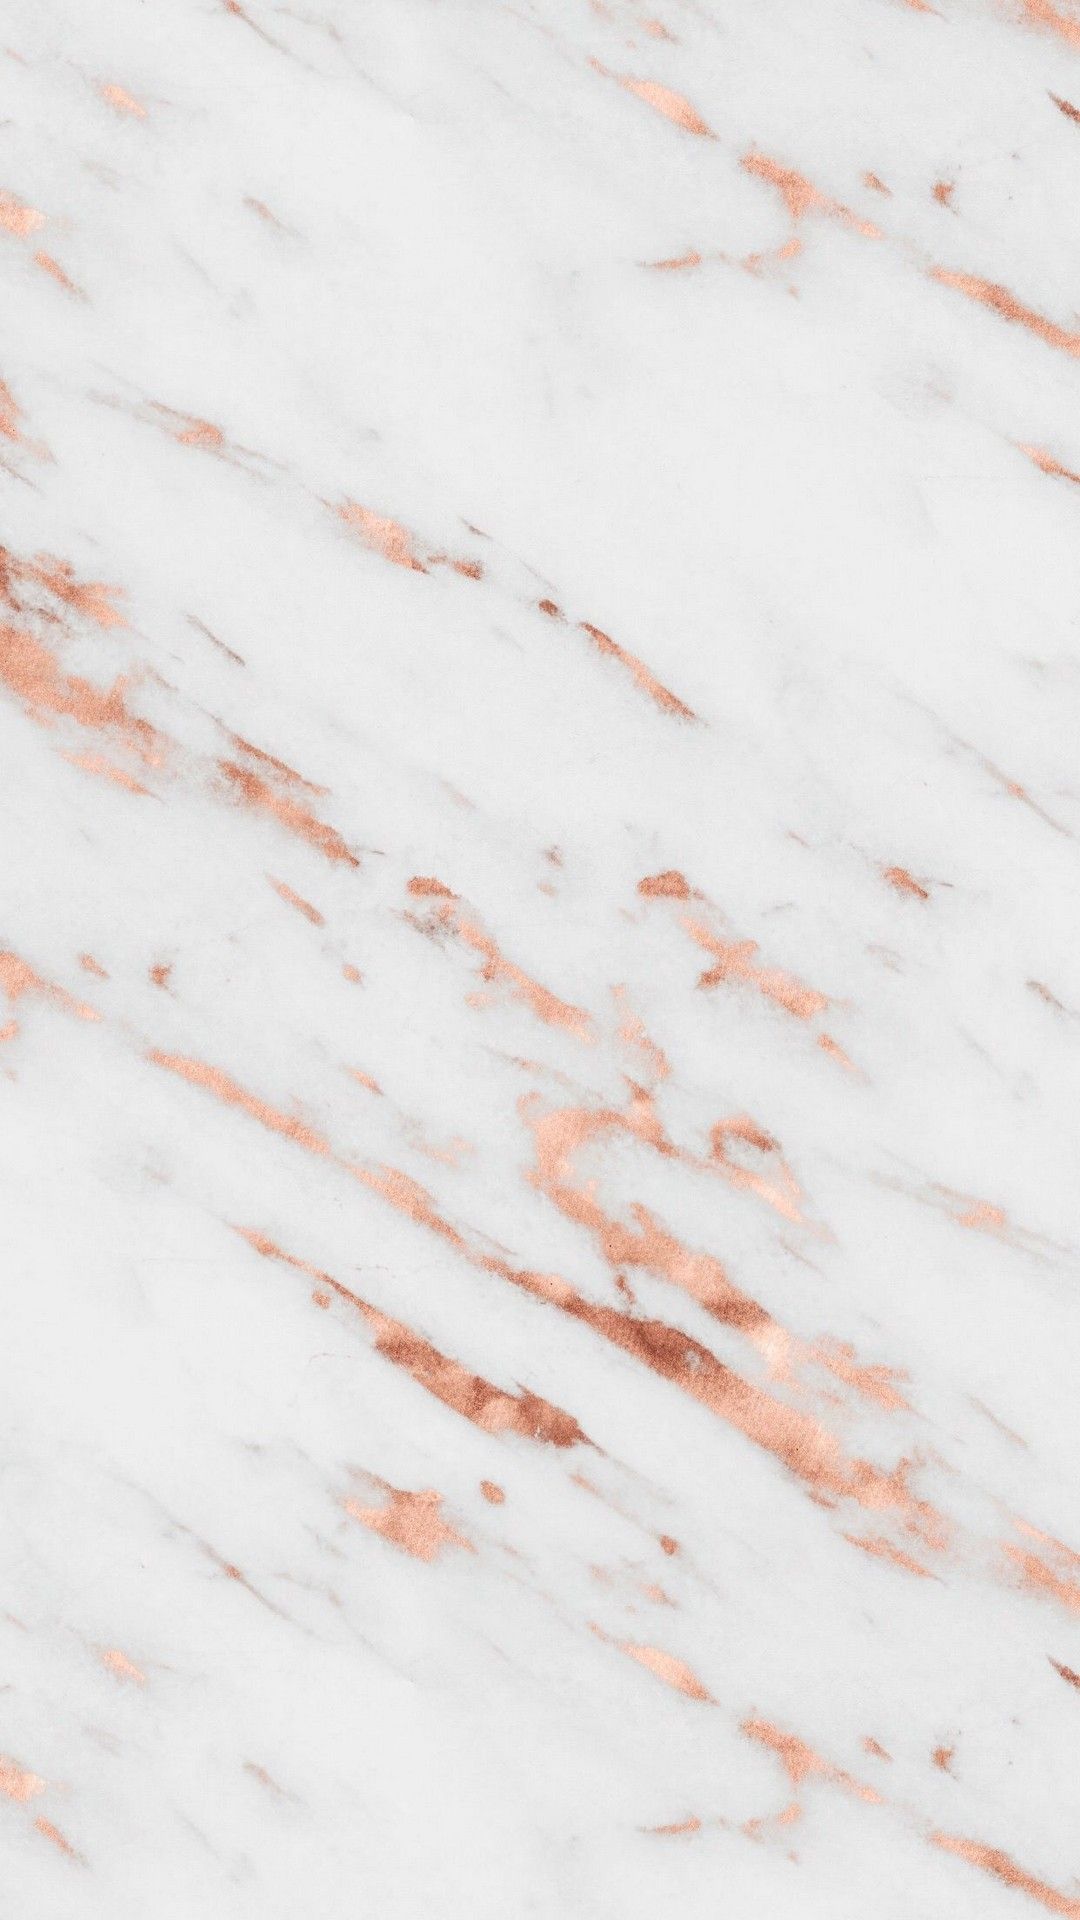 Rose Gold Marble iPhone Wallpaper Free Rose Gold Marble iPhone Background